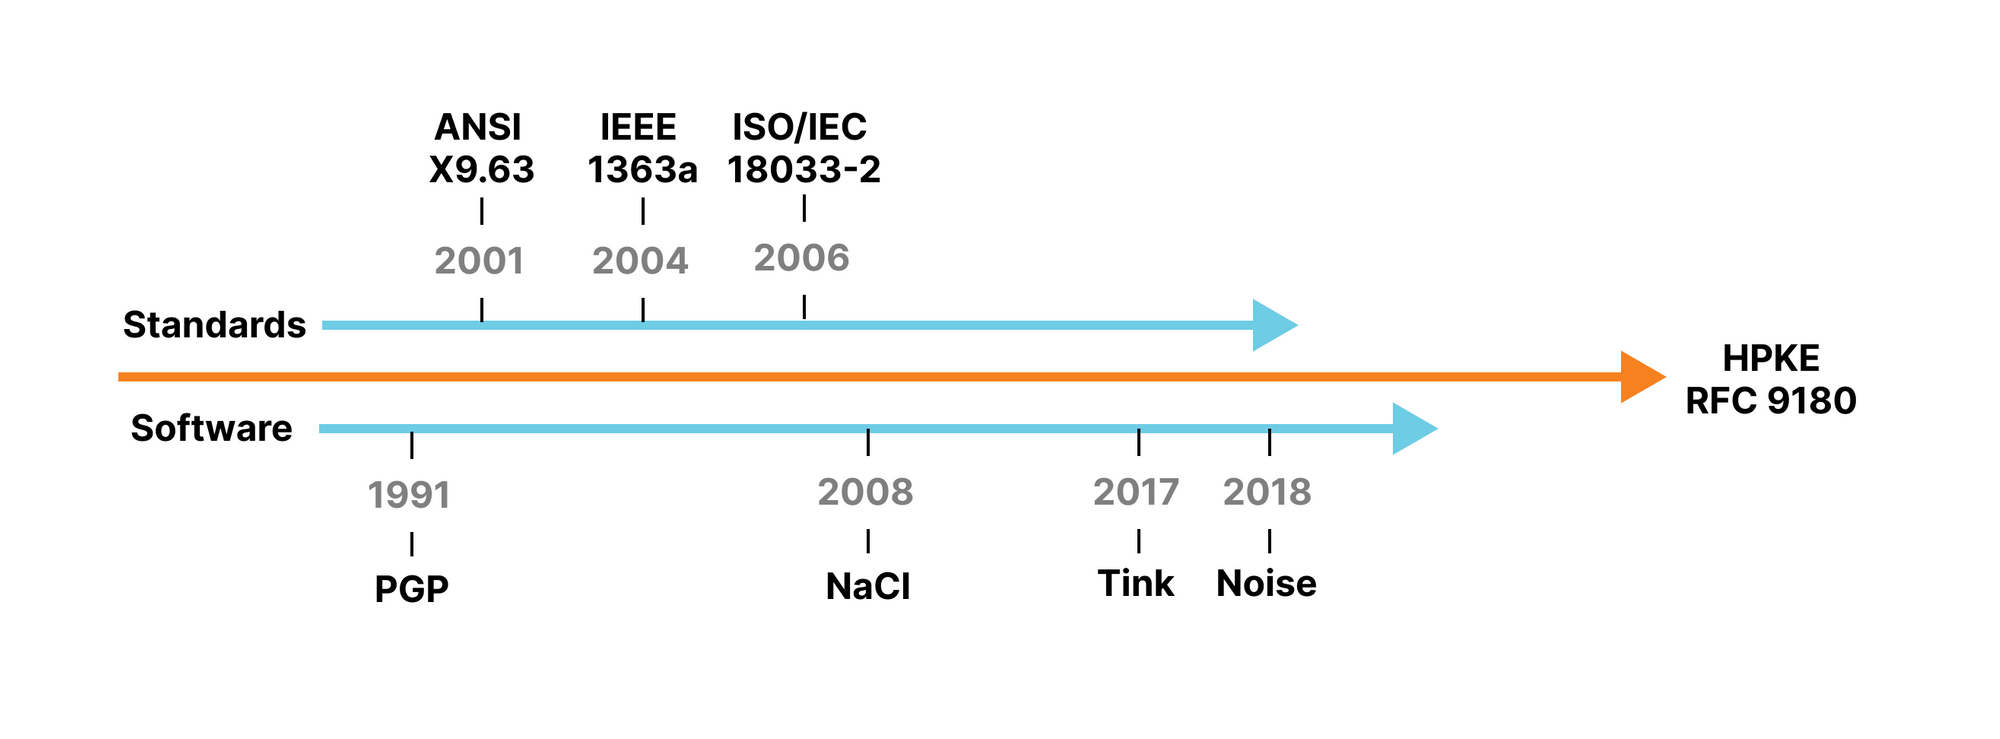 Timeline of related standards and software